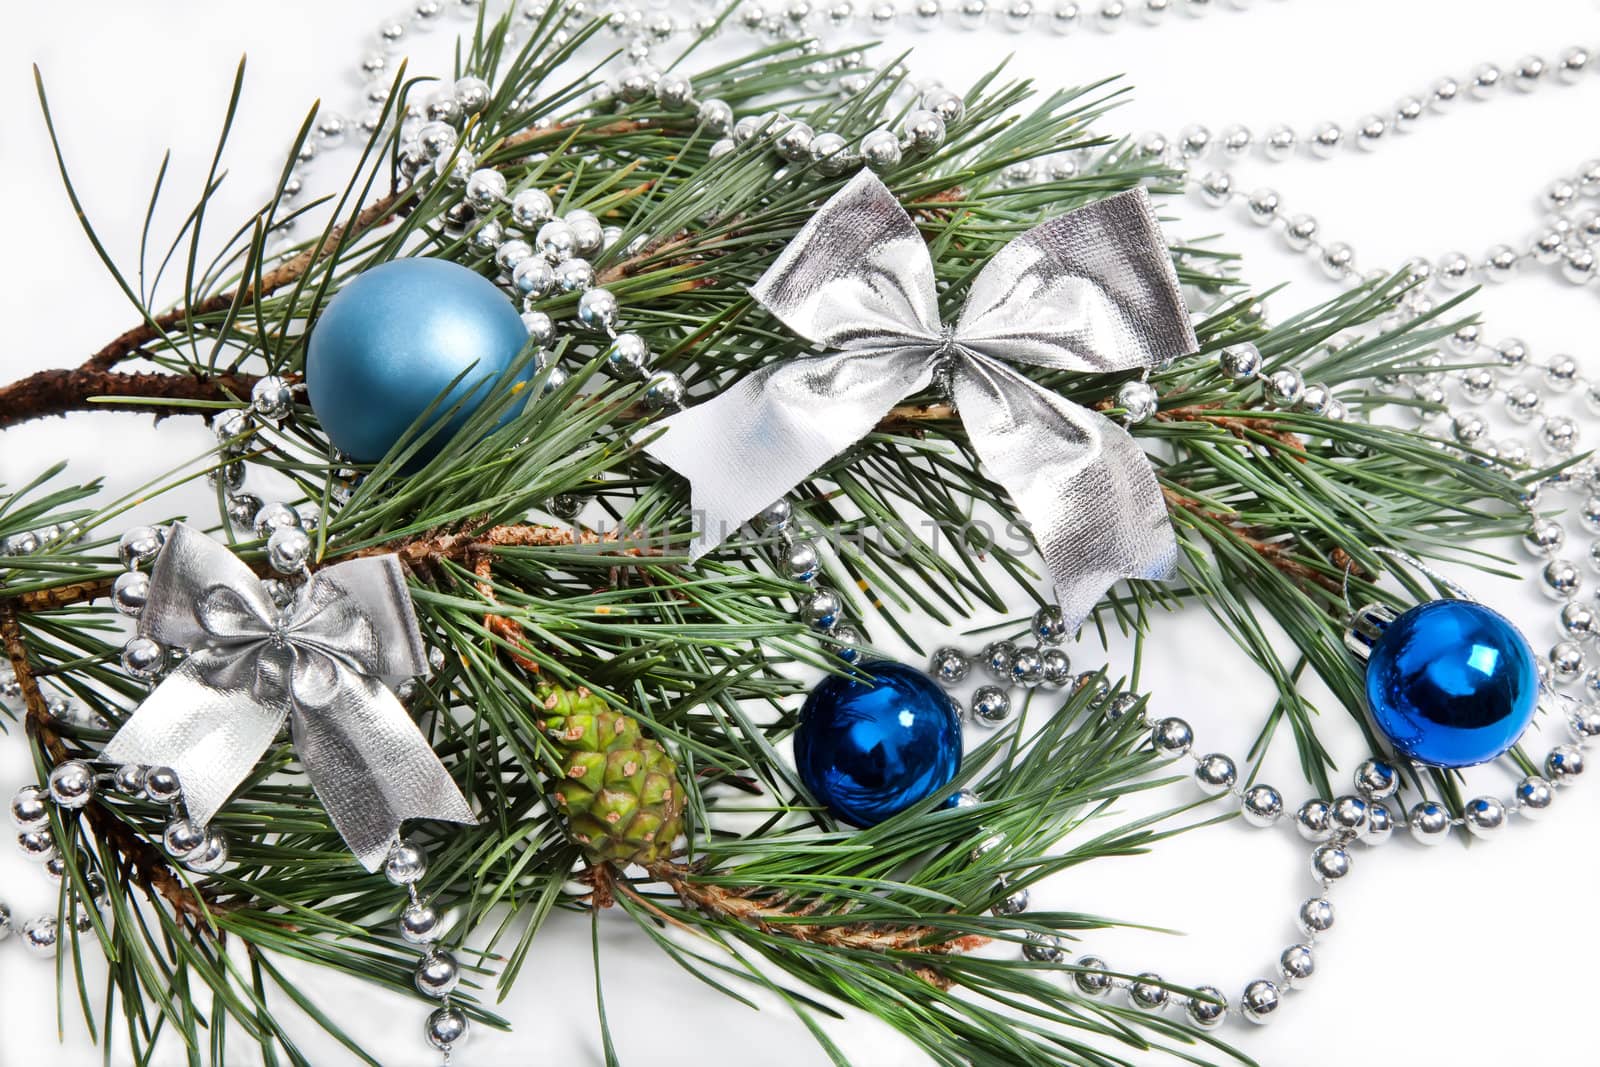 Christmas decorations with blue balls and silver beads on white background